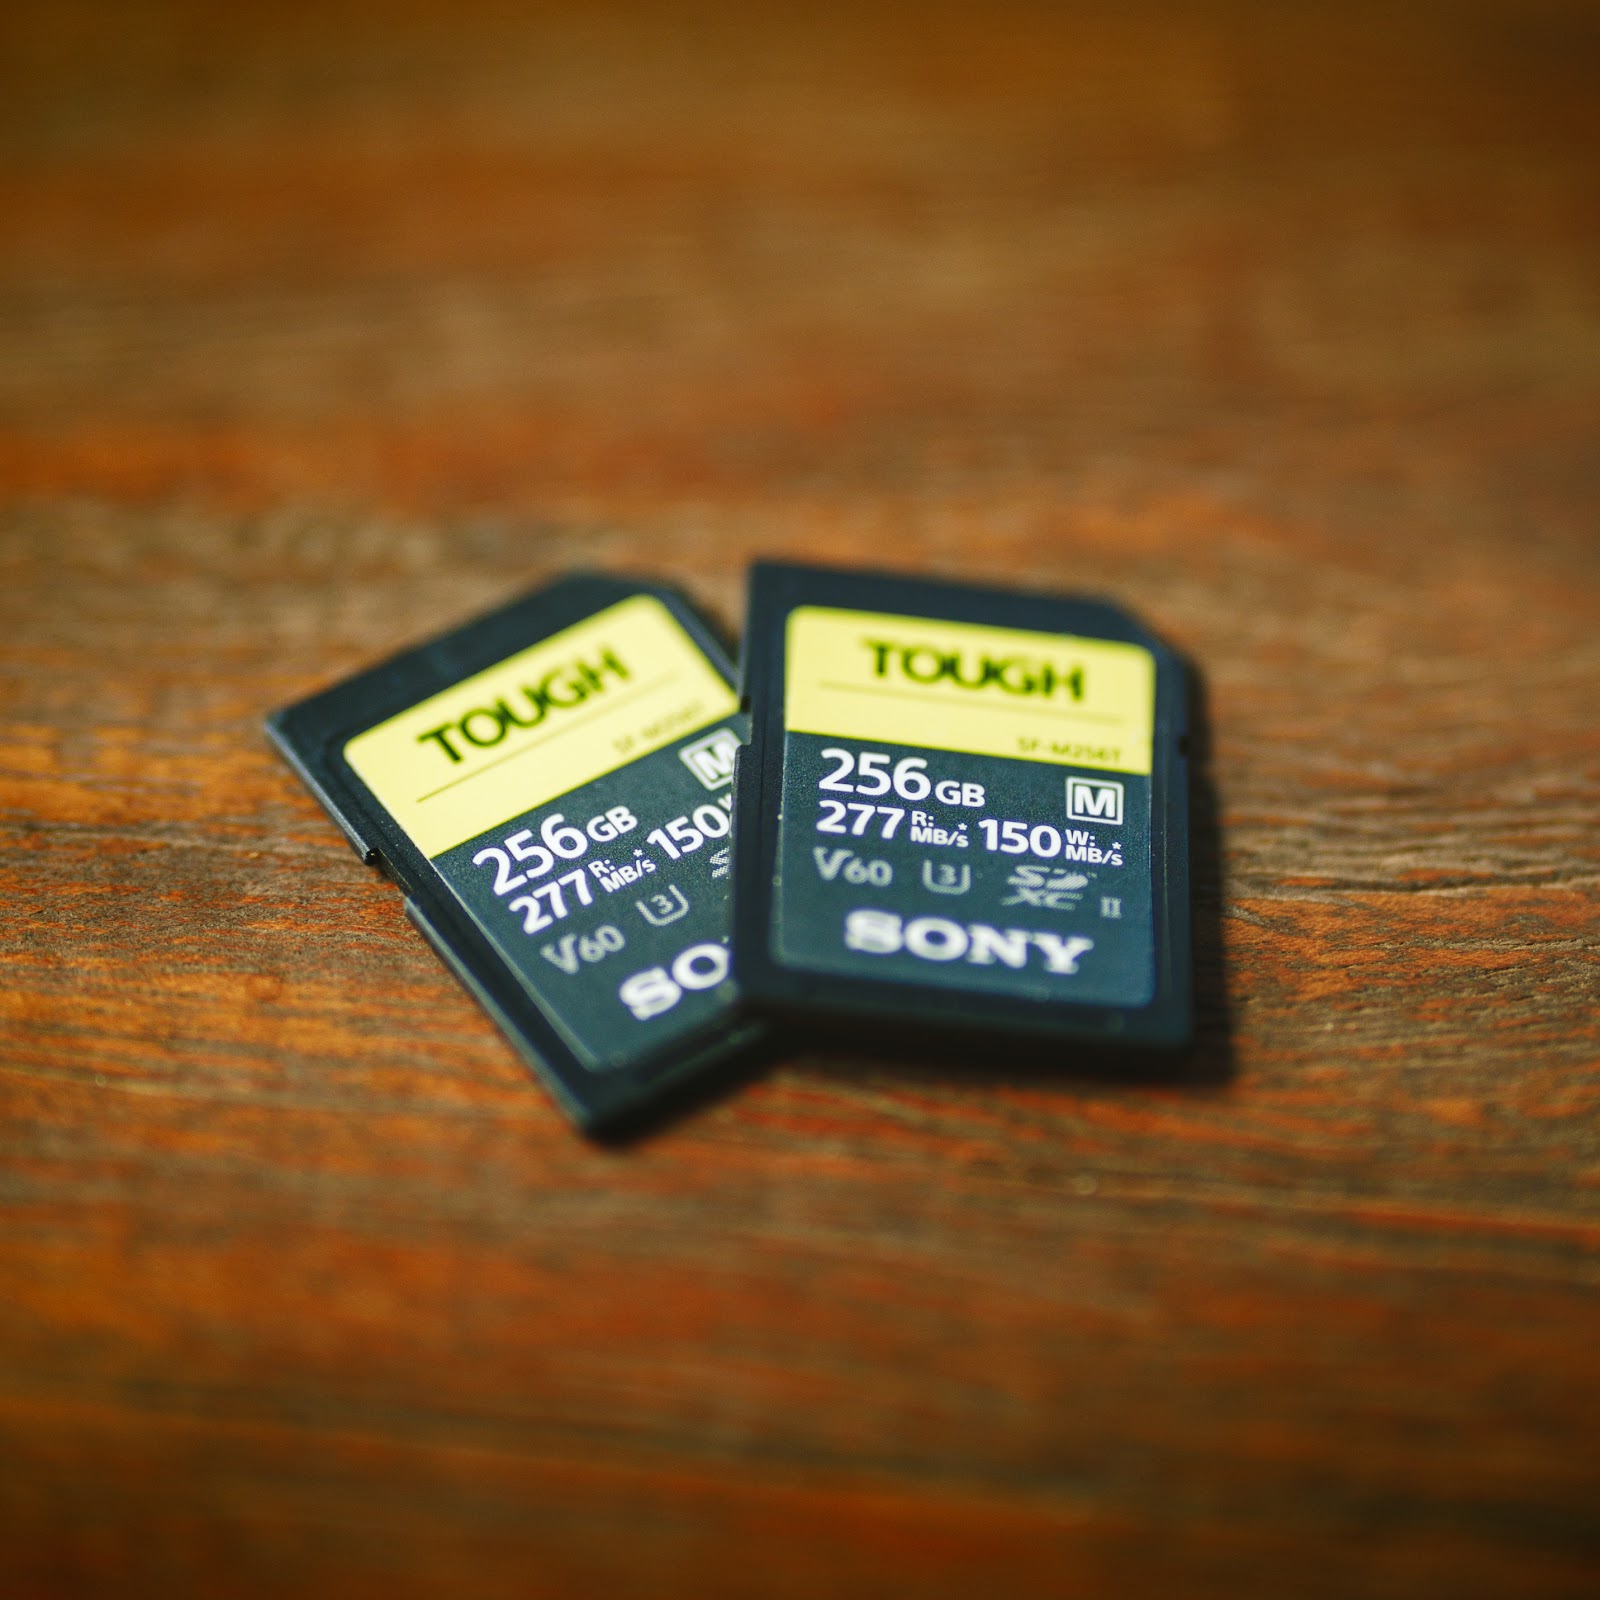 sony 256gb tough cards for backup storage in fast workflow post-production 